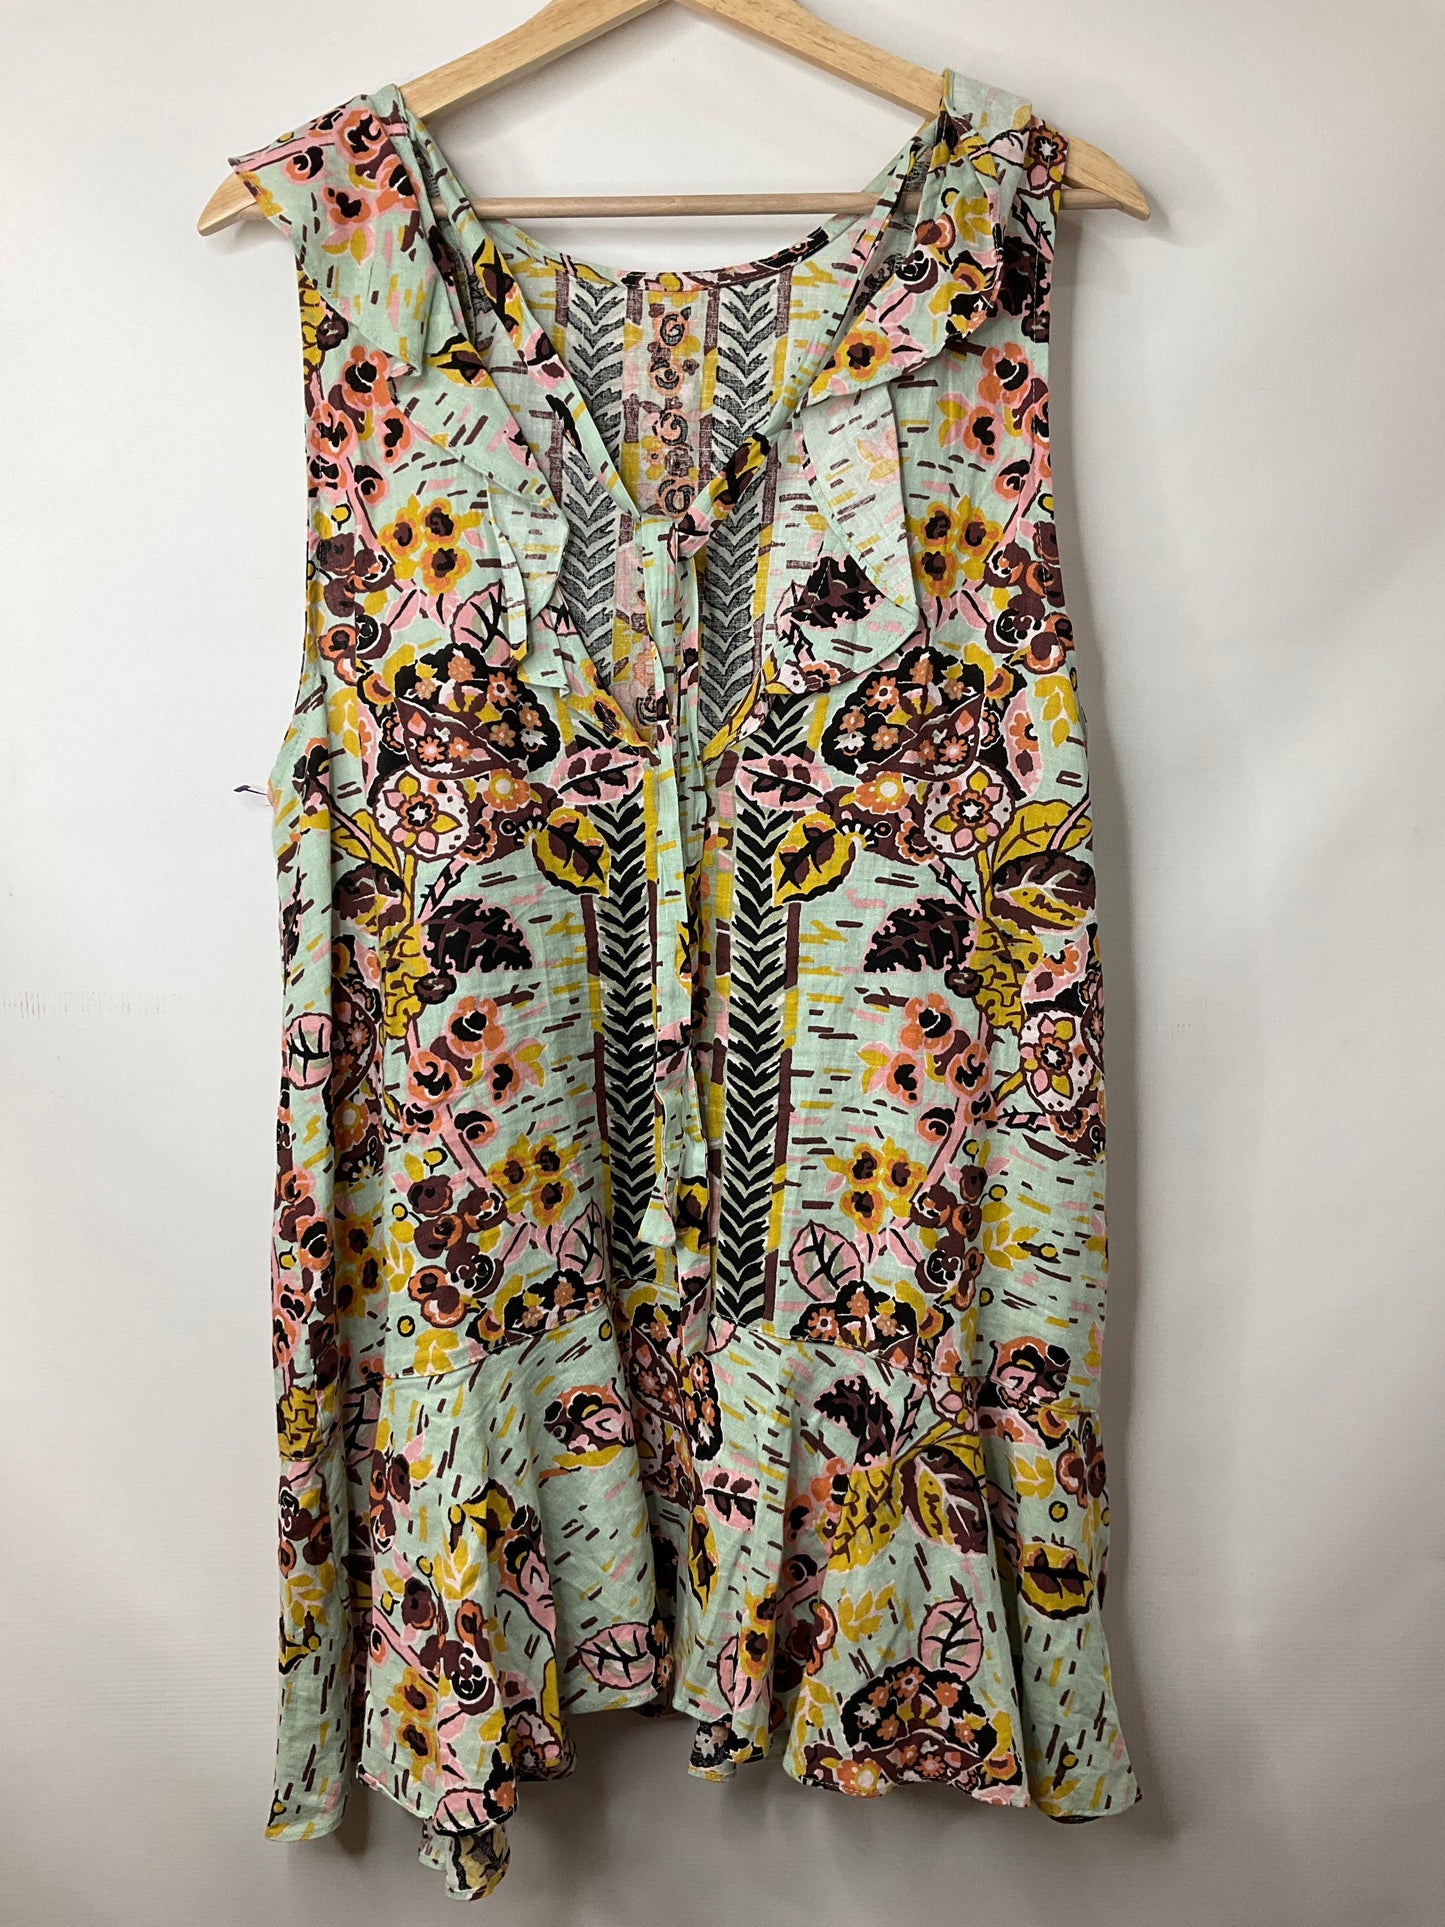 Multi-colored Dress Casual Short Free People, Size L